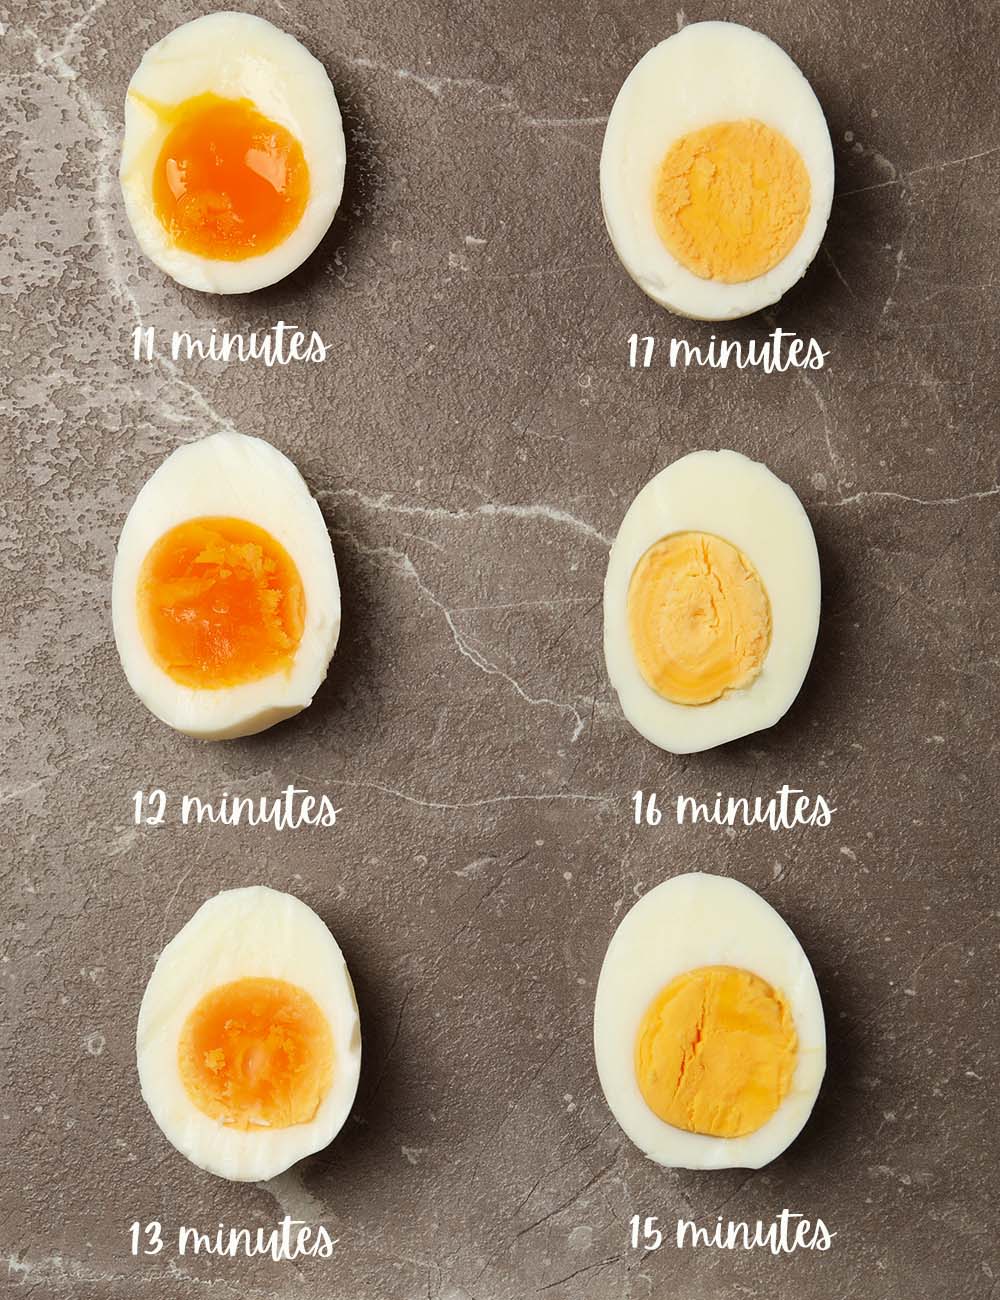 It all depends on how you plan to use your cooked eggs, either you want it soft-boiled or hard-boiled. Follow the following timelines to get different types of egg textures.